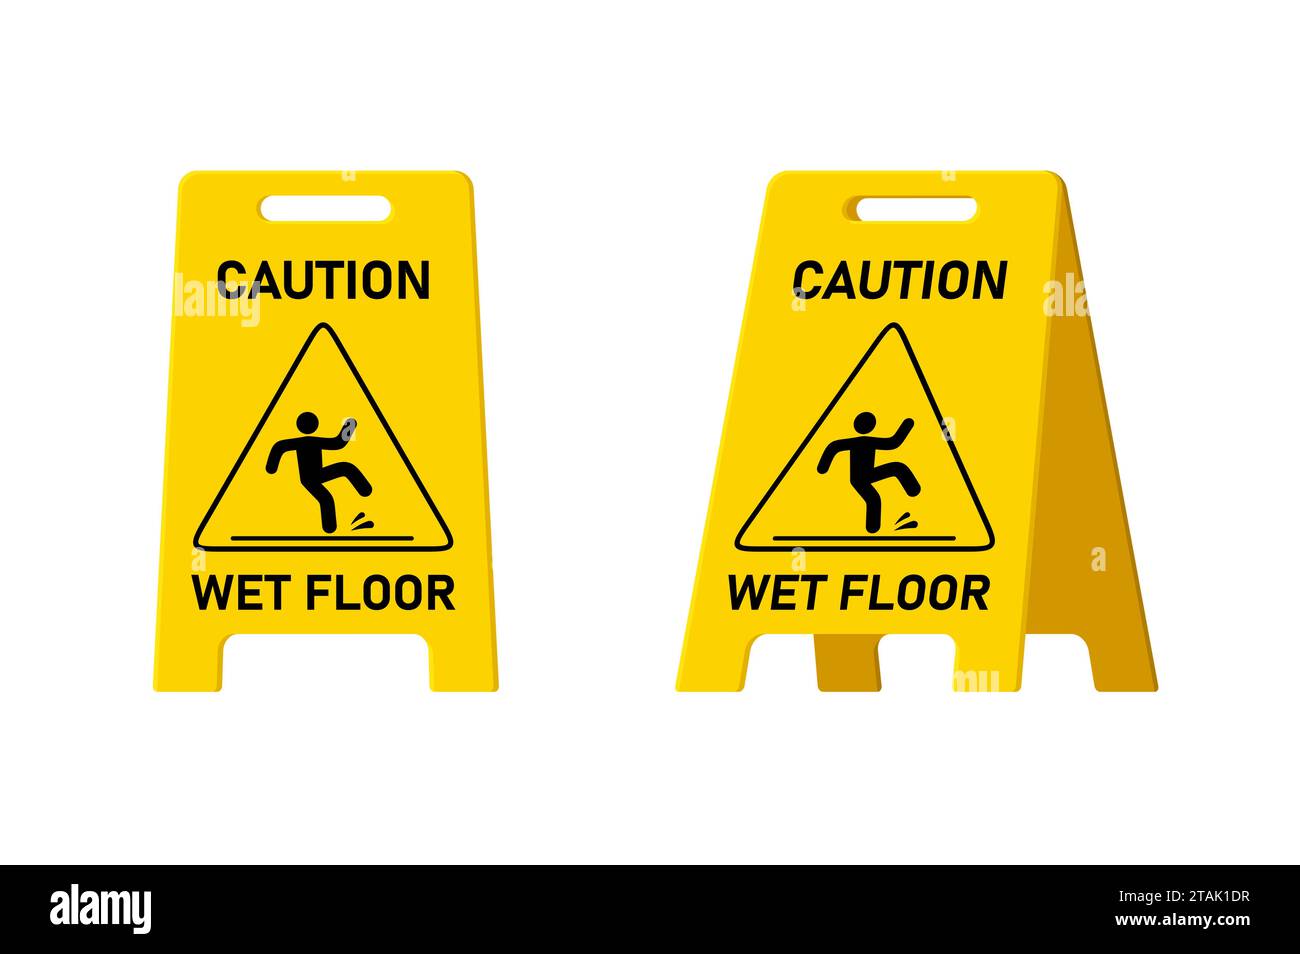 Wet floor caution sign isolated on white background, Public warning yellow symbol clipart. Slippery surface beware plastic board design element. Stock Vector